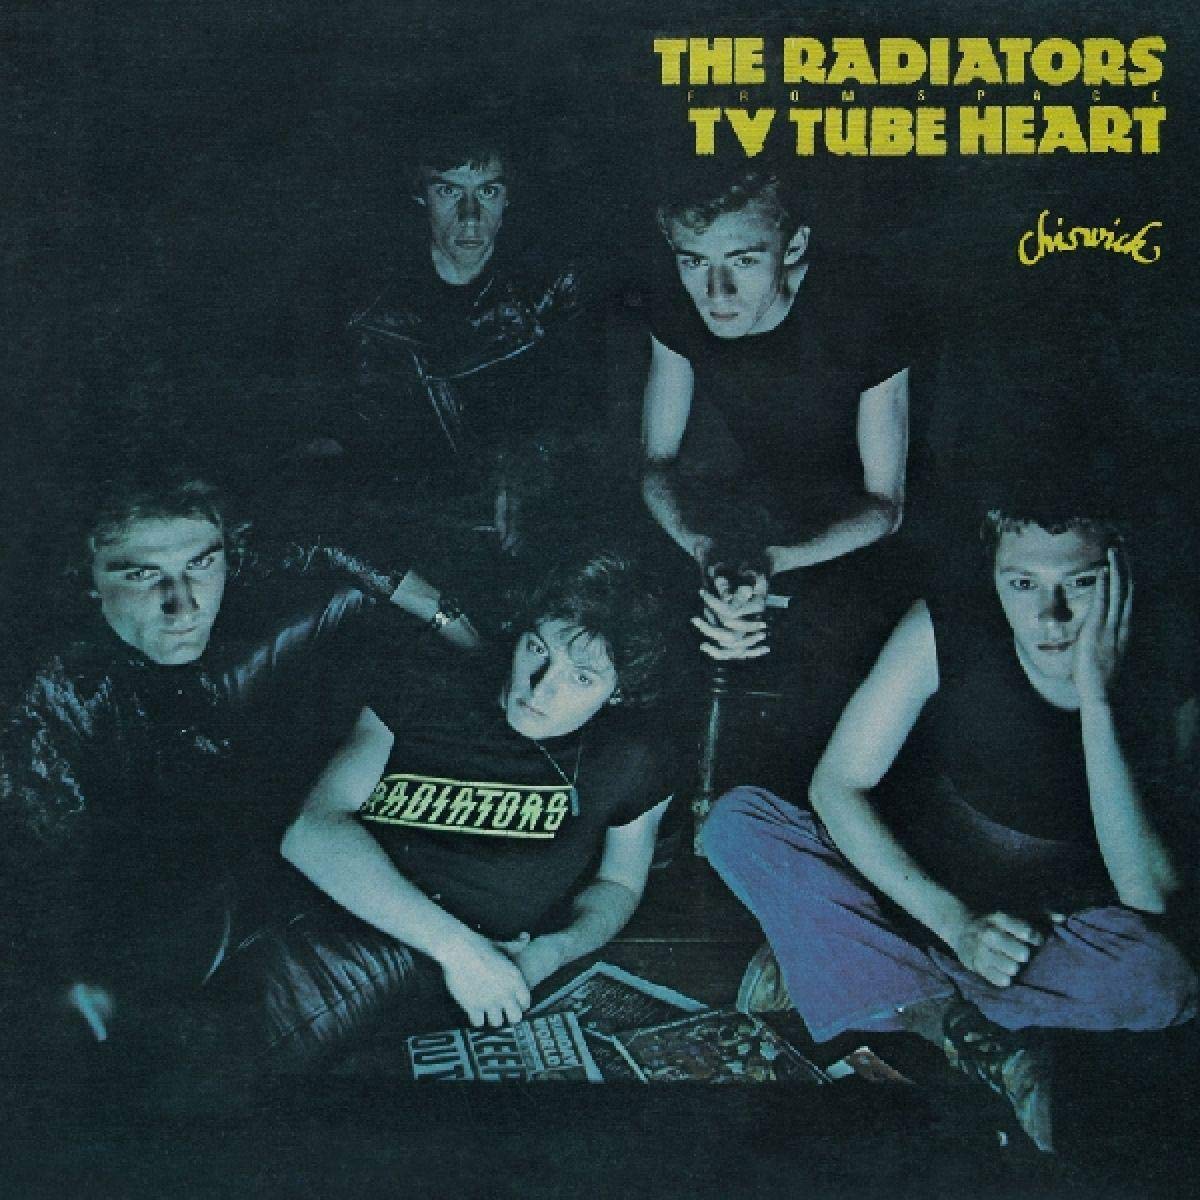 NEWS The Ignition Of Irish Punk | 44 years ago, Radiators From Space released their debut album 'TV Tube Heart'